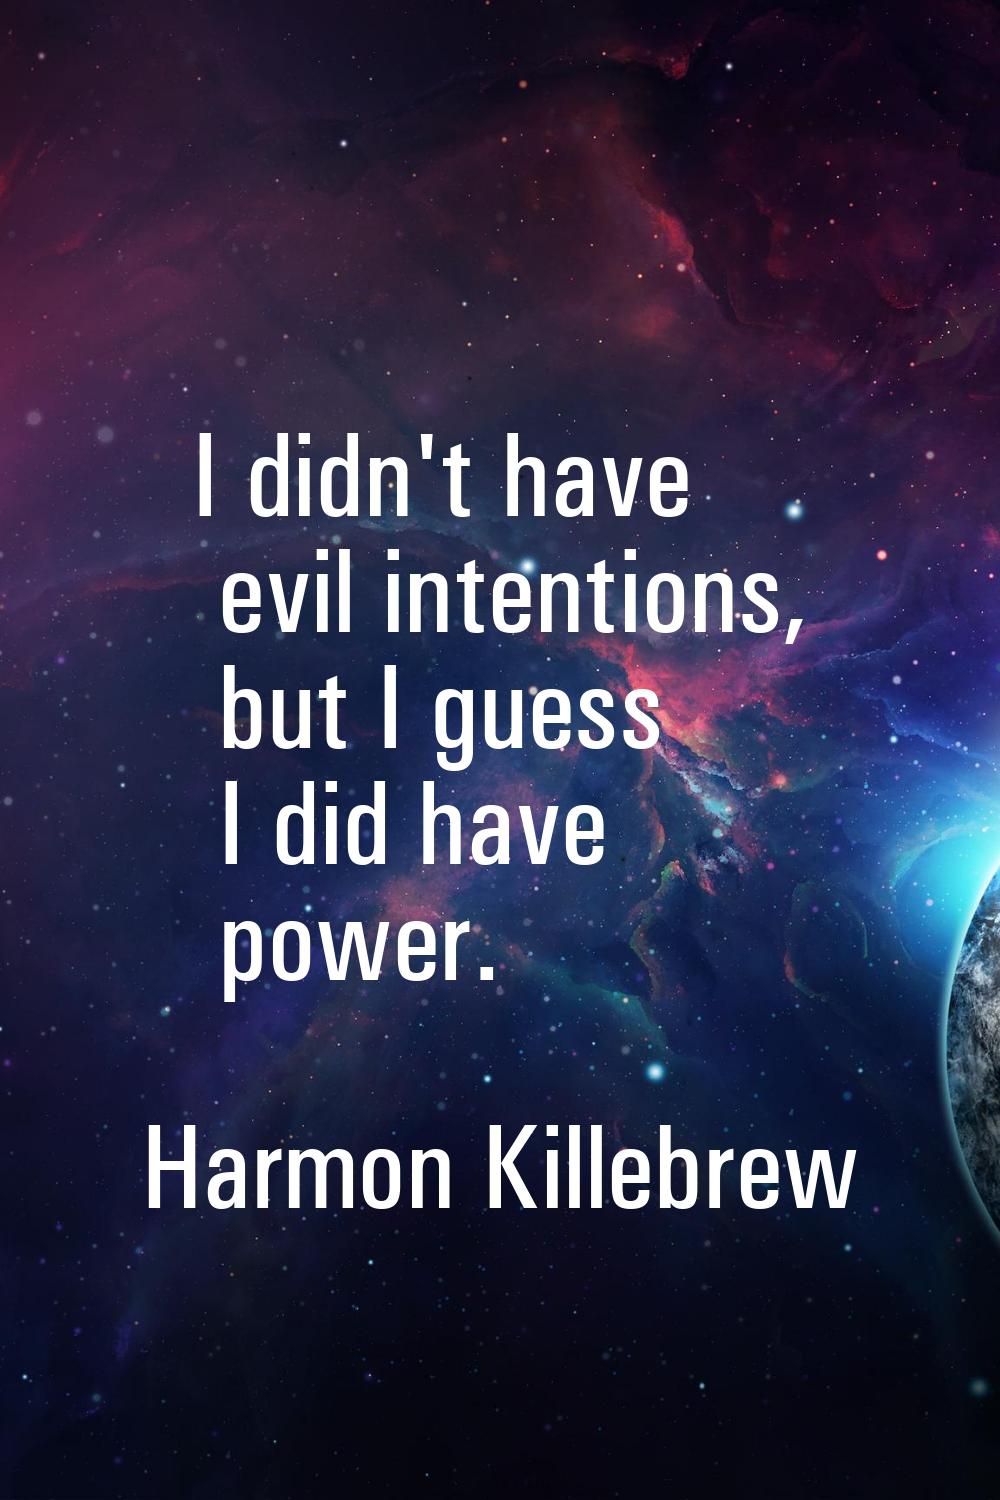 I didn't have evil intentions, but I guess I did have power.